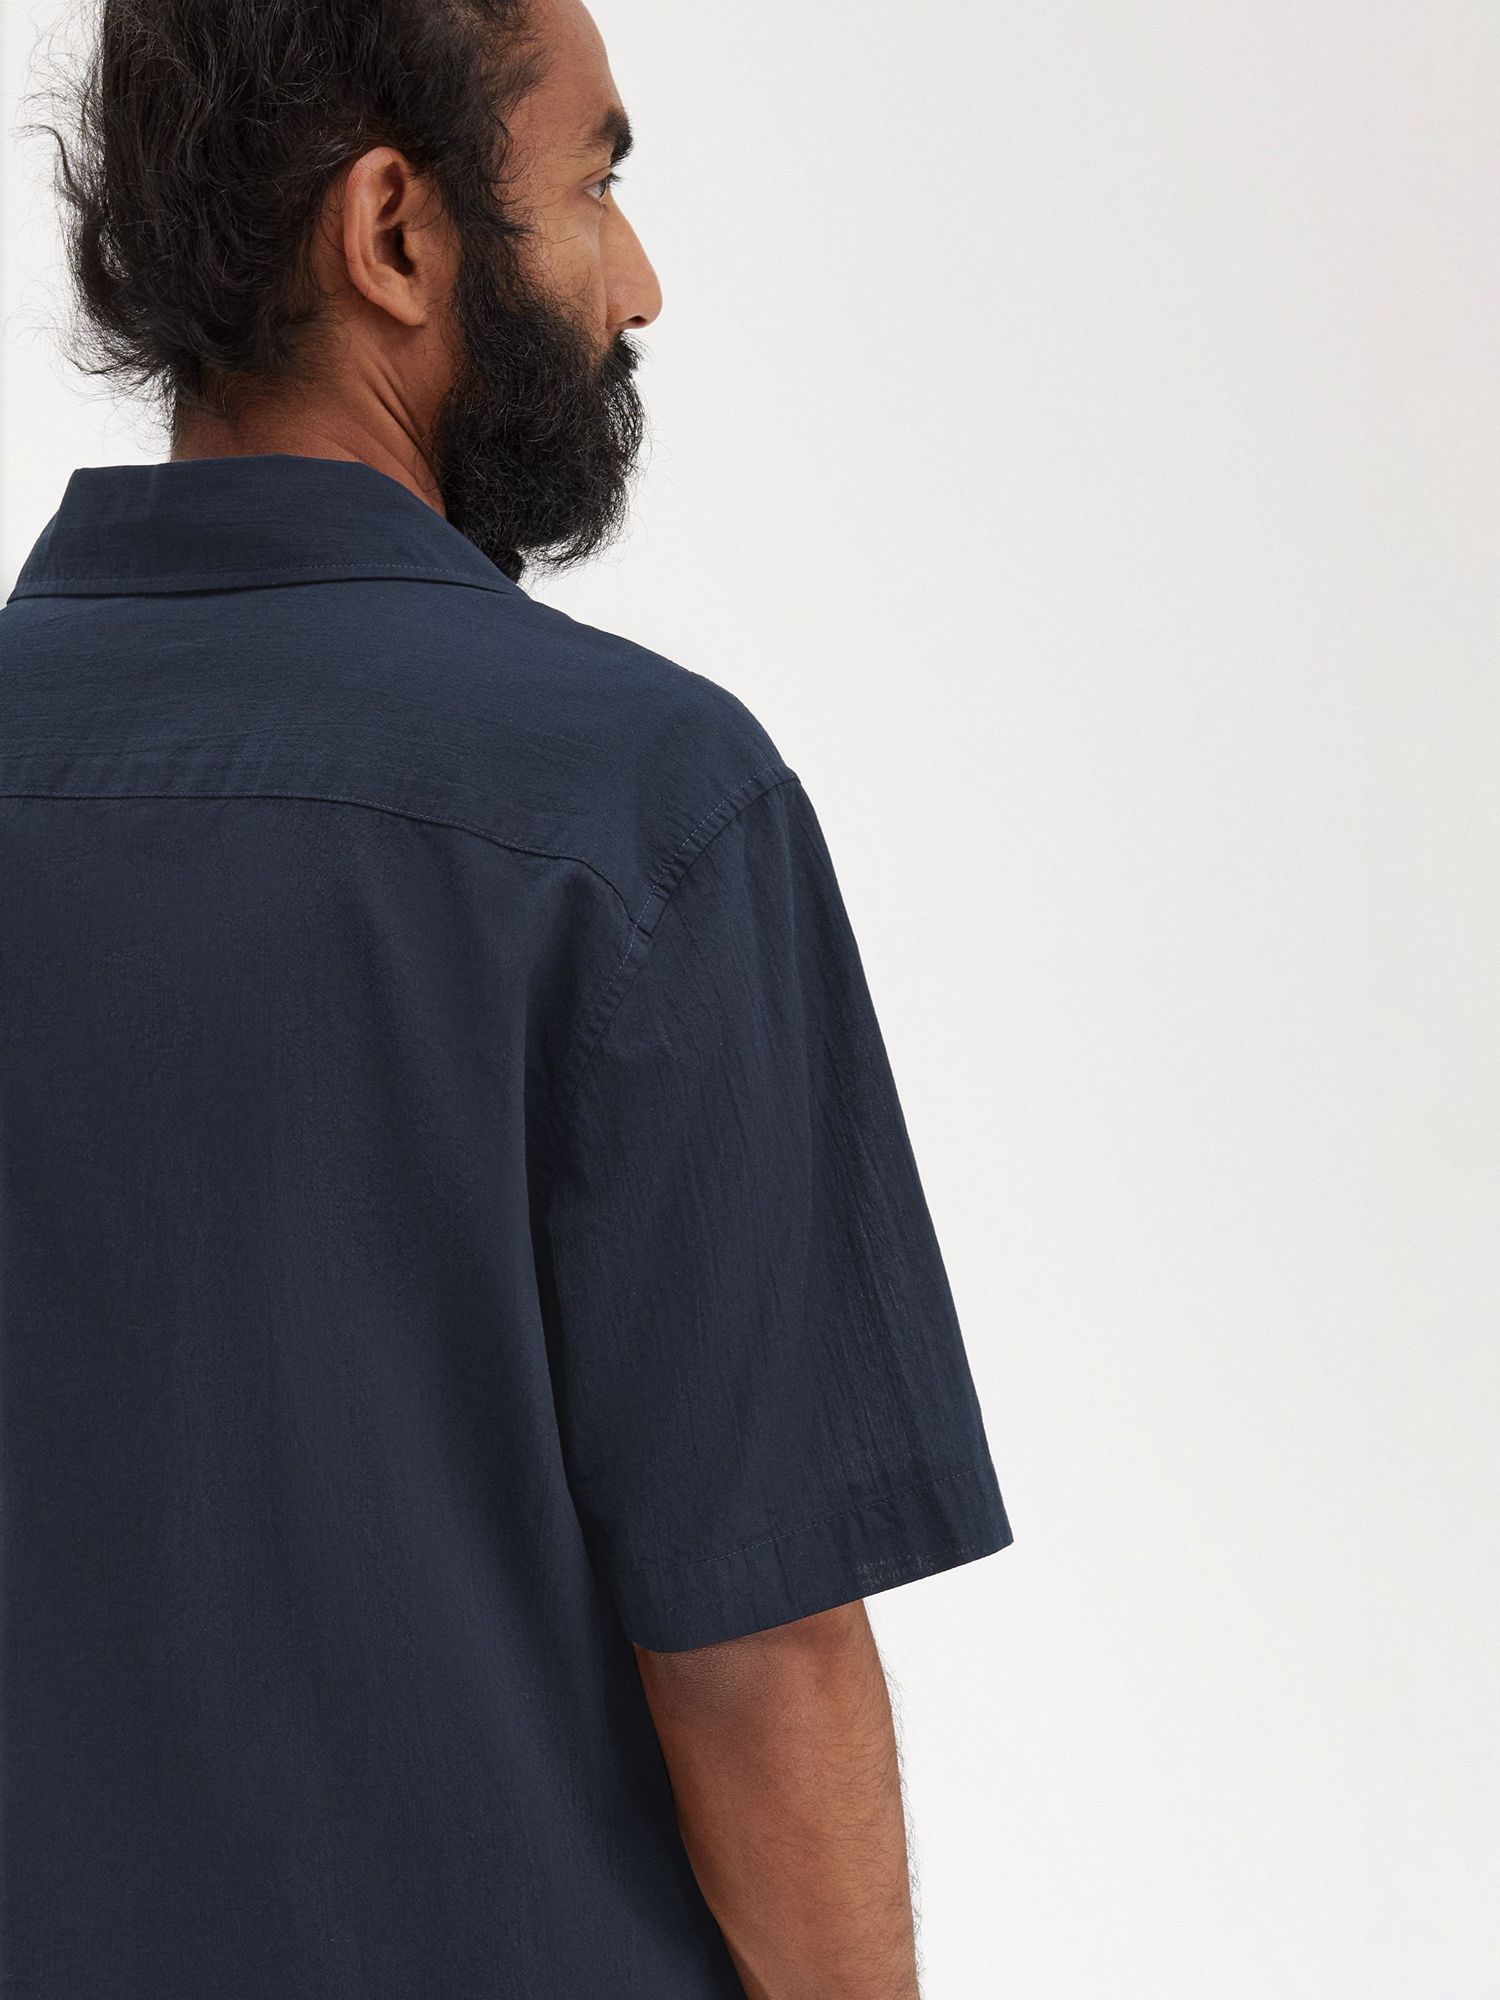 Fred Perry Revere Collar Shirt, Navy, S